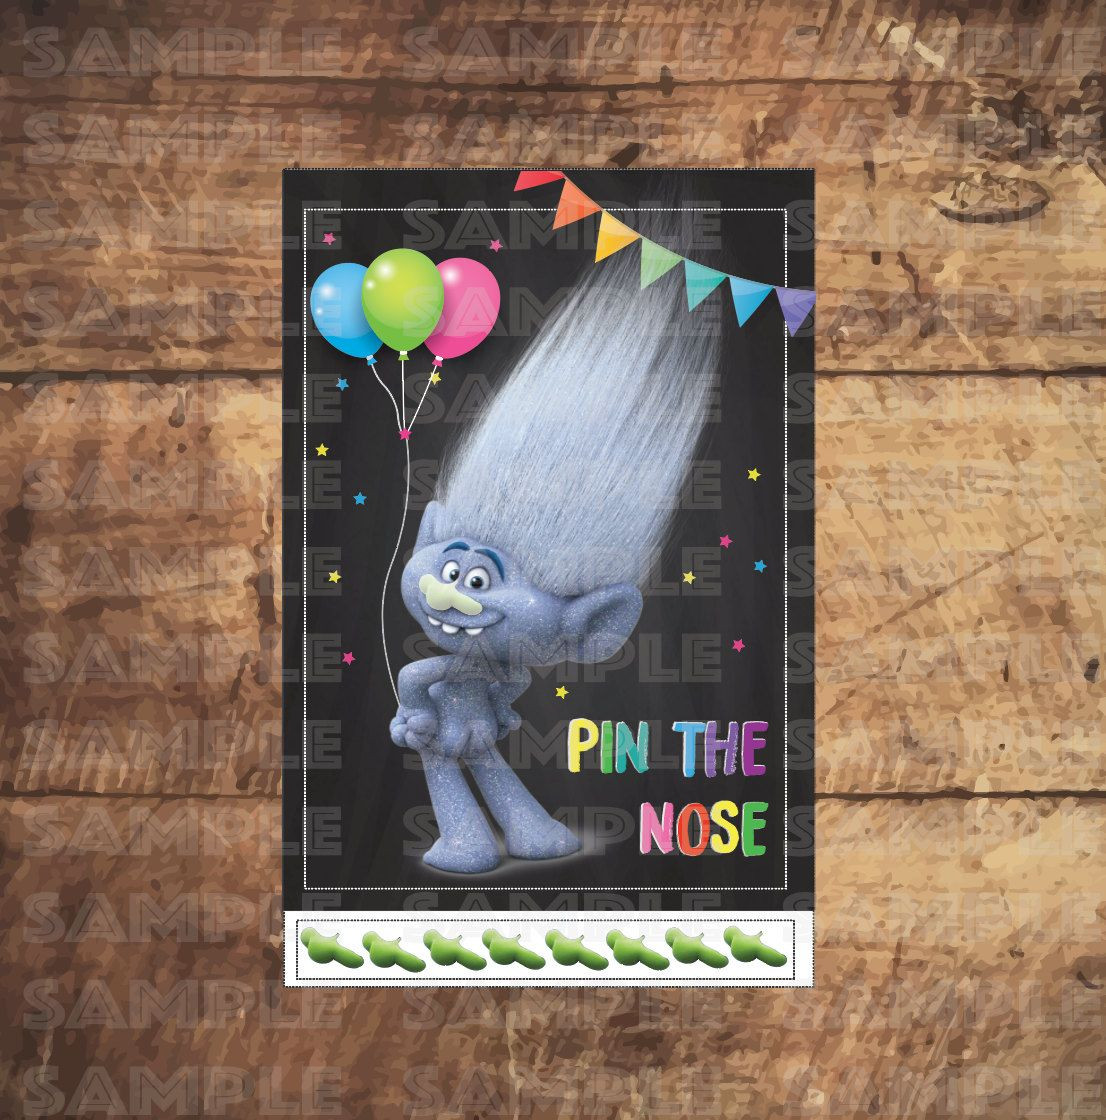 Trolls Birthday Party Games
 TROLLS PARTY GAME Pin The Nose Pin the Tail Trolls